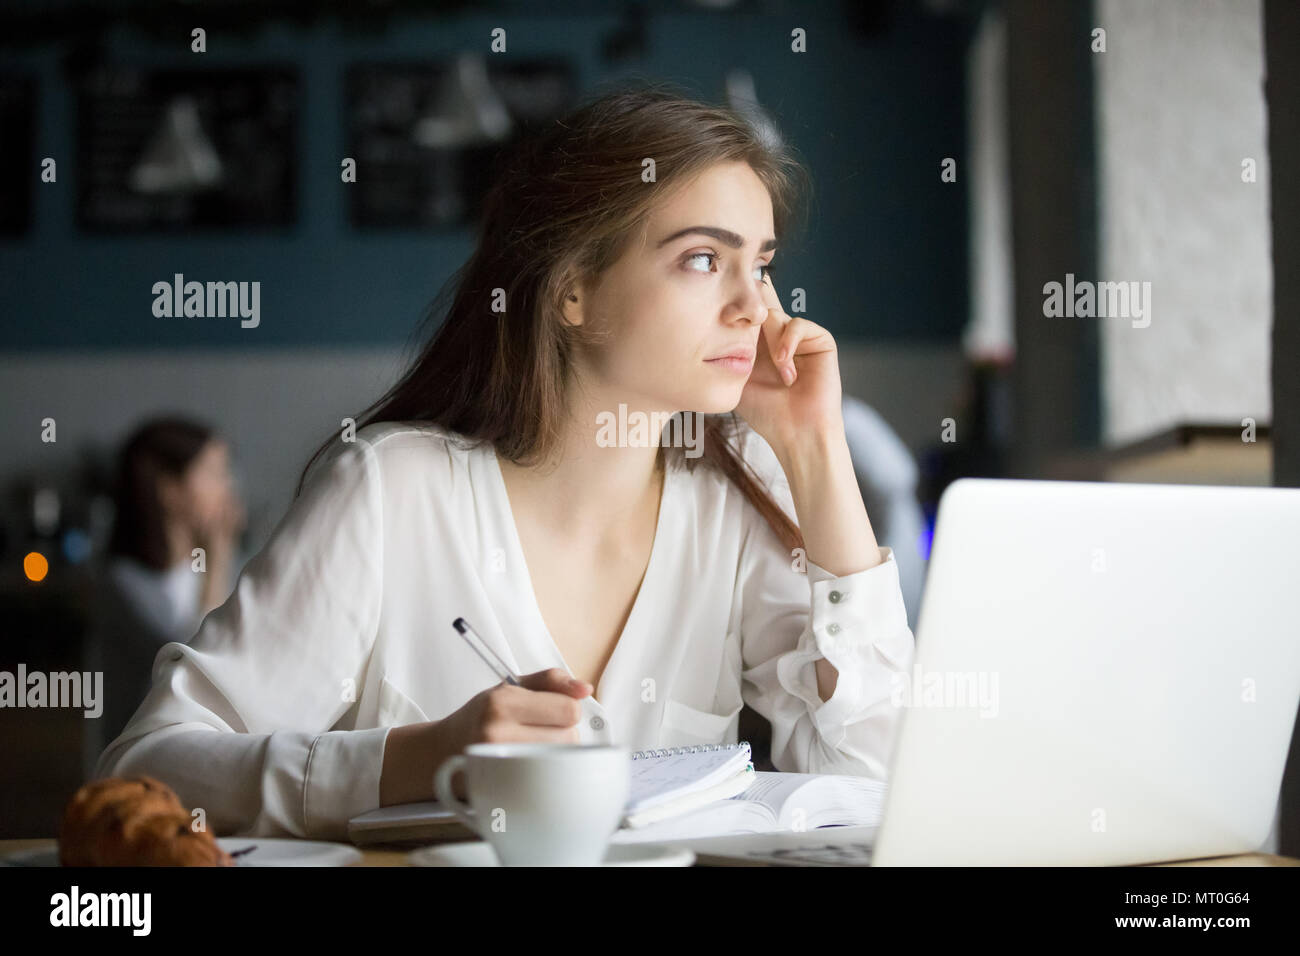 Thoughtful female writer or student writing notes in coffee shop Stock Photo